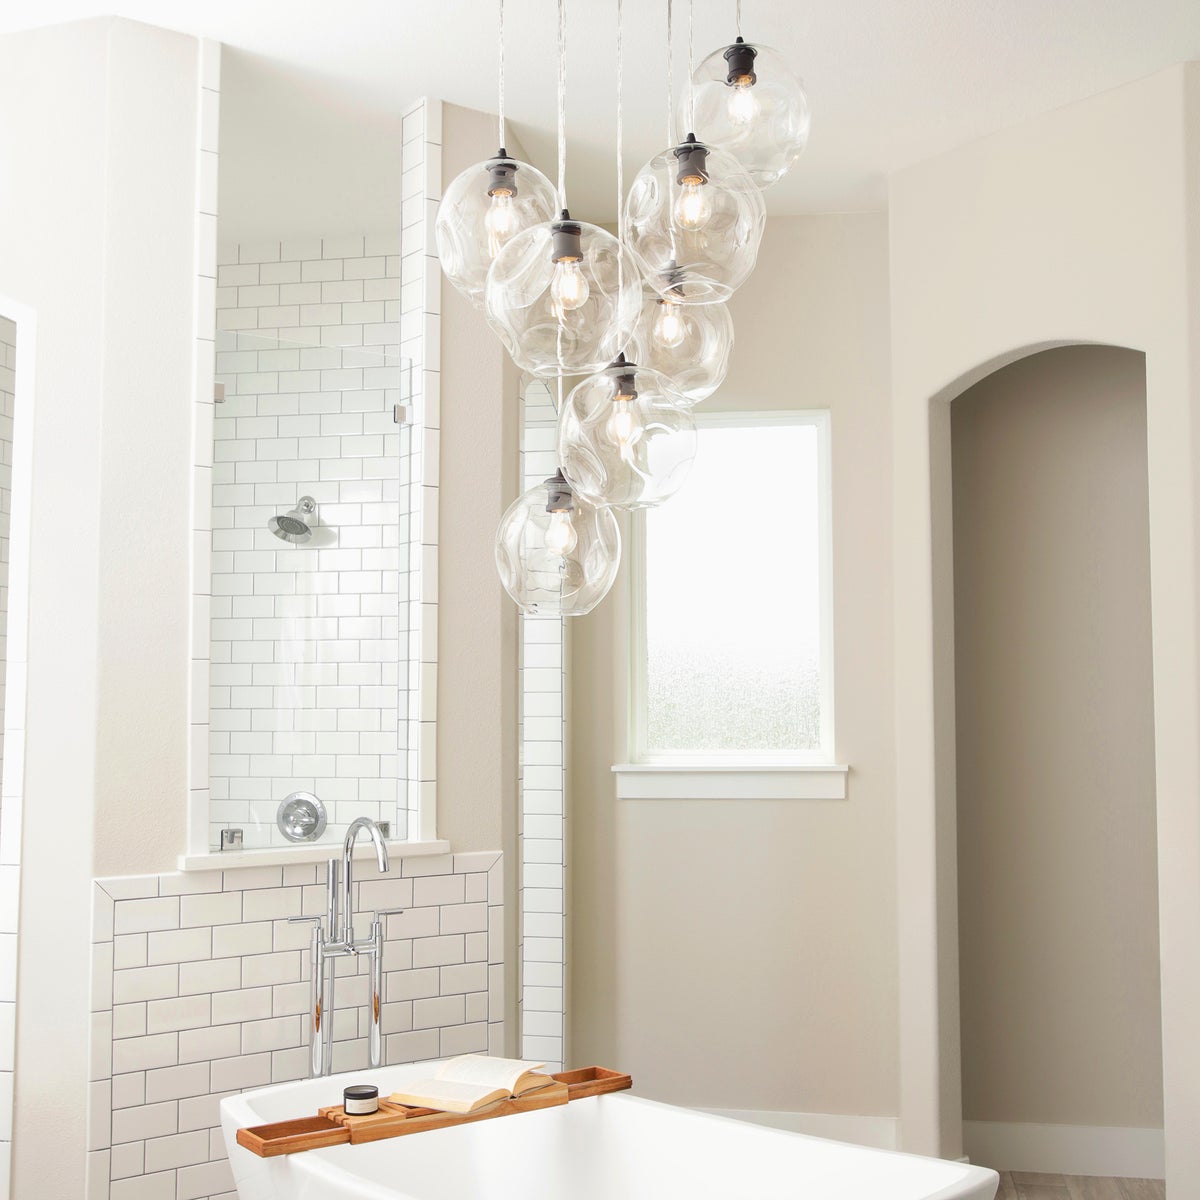 Cluster Pendant Light in a contemporary bathroom with a bathtub, chandelier, and clear glass lights from the ceiling.